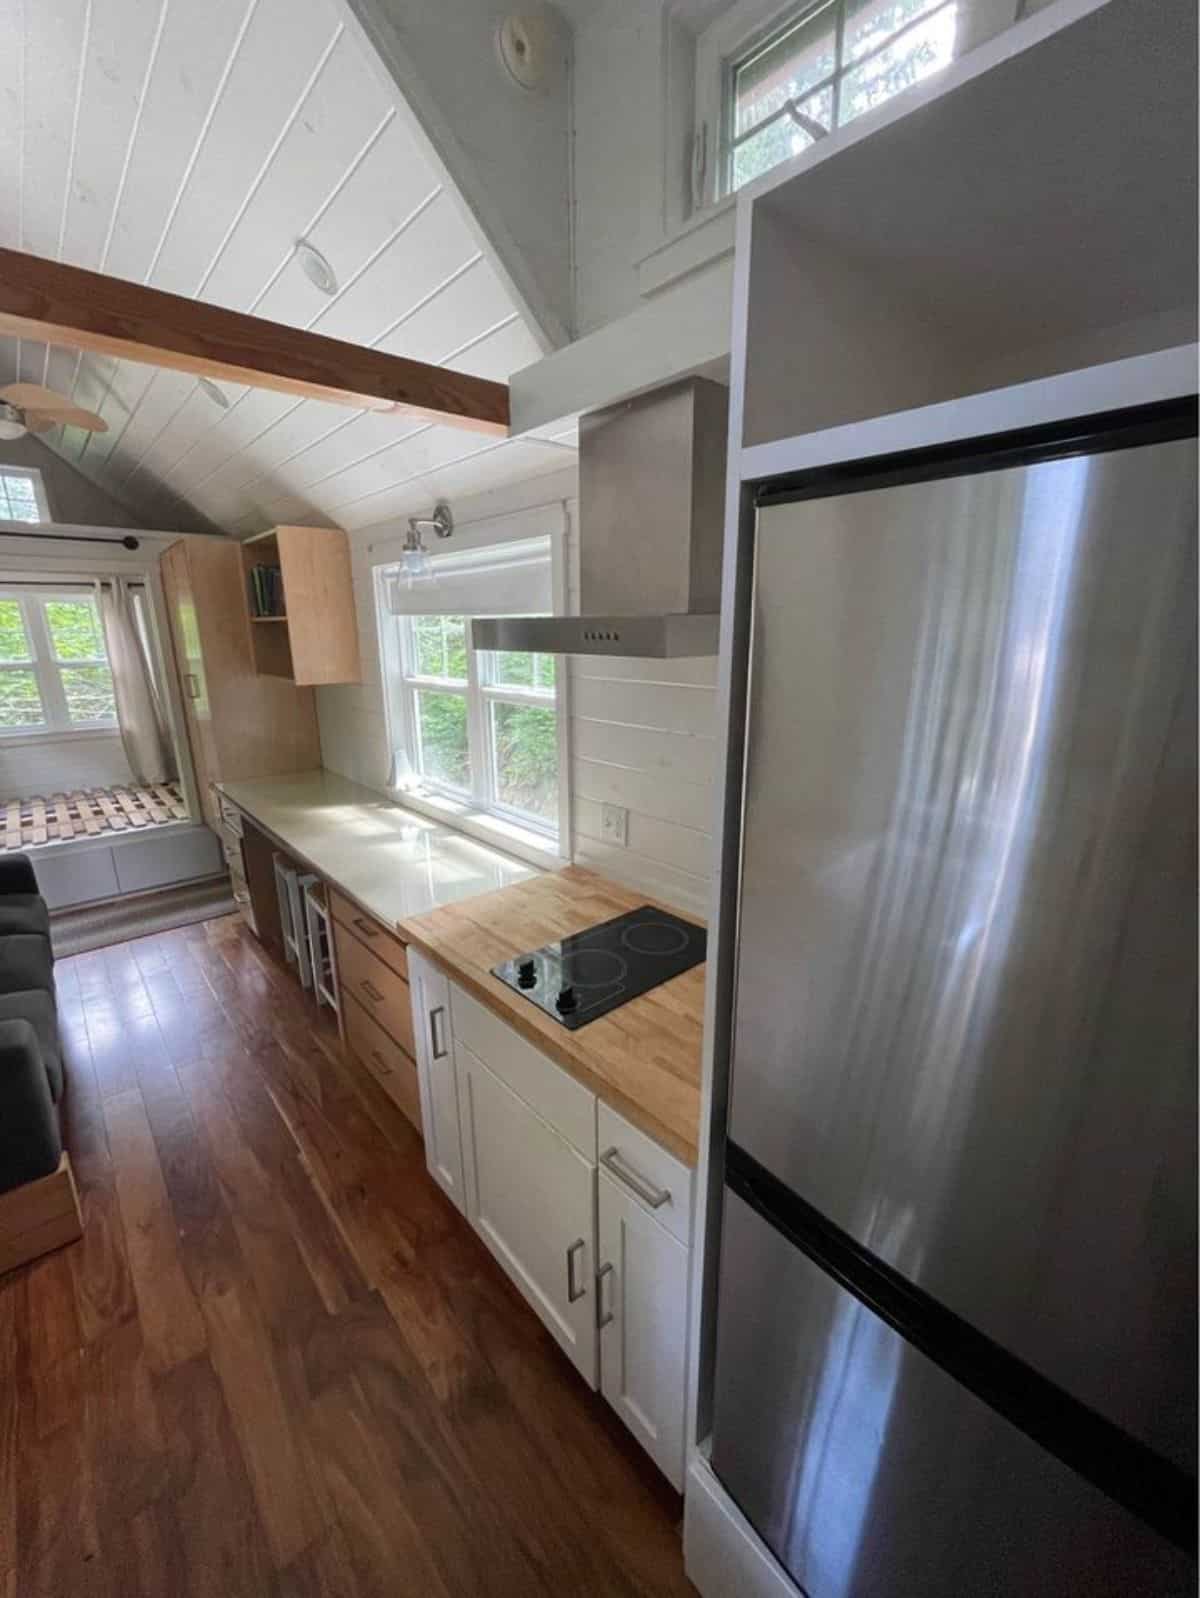 1 side of kitchen area has refrigerator, countertop and stove